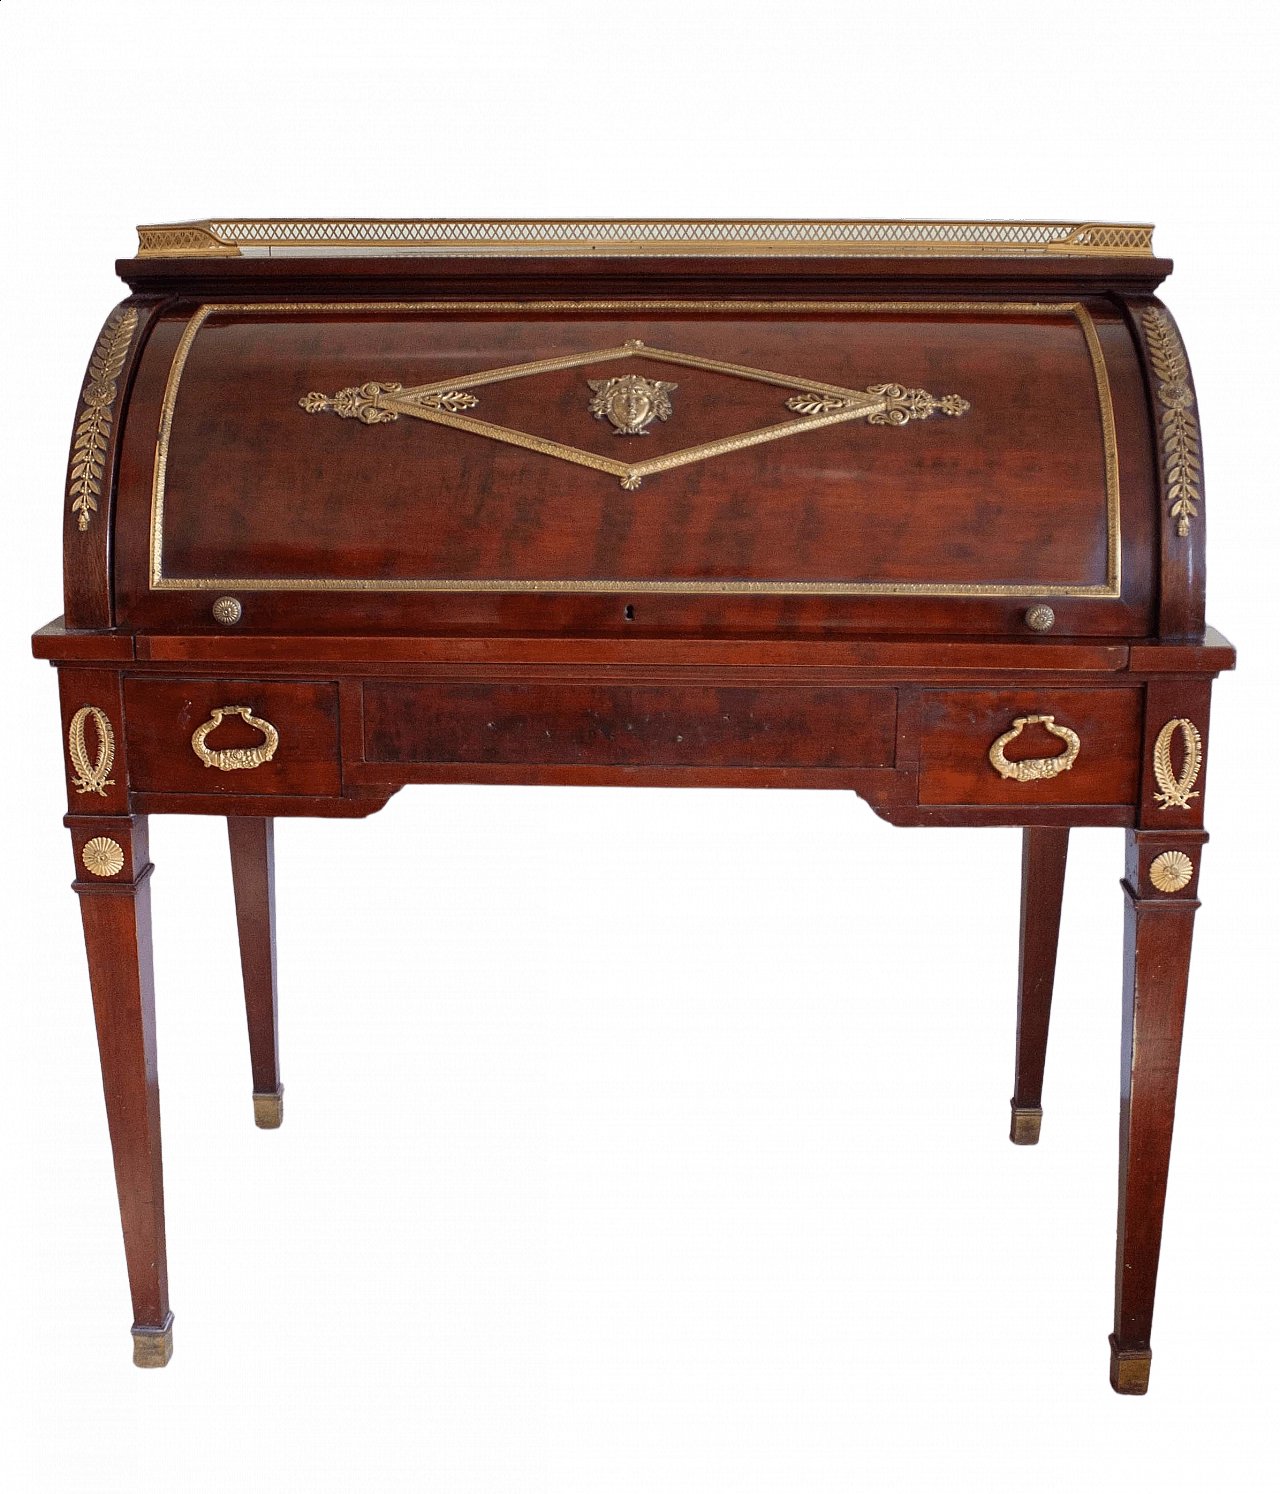 Empire-style cabinet with flap, 19th century 14